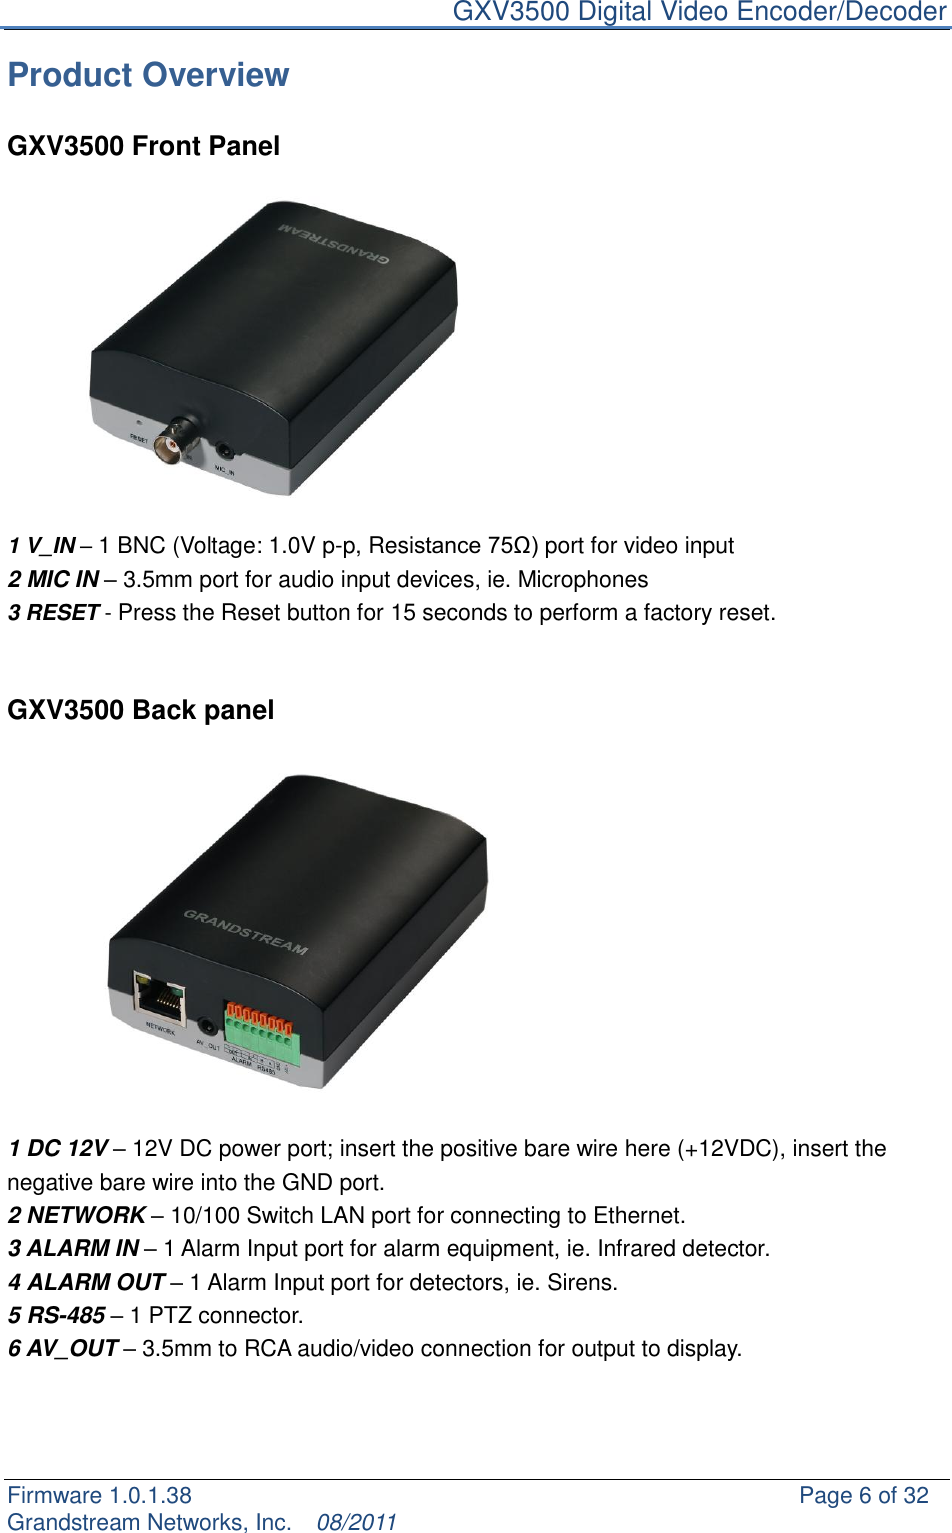     GXV3500 Digital Video Encoder/Decoder Firmware 1.0.1.38                                                     Page 6 of 32     Grandstream Networks, Inc.  08/2011  Product Overview  GXV3500 Front Panel  1 V_IN – 1 BNC (Voltage: 1.0V p-p, Resistance 75Ω) port for video input 2 MIC IN – 3.5mm port for audio input devices, ie. Microphones   3 RESET - Press the Reset button for 15 seconds to perform a factory reset.   GXV3500 Back panel  1 DC 12V – 12V DC power port; insert the positive bare wire here (+12VDC), insert the negative bare wire into the GND port. 2 NETWORK – 10/100 Switch LAN port for connecting to Ethernet. 3 ALARM IN – 1 Alarm Input port for alarm equipment, ie. Infrared detector. 4 ALARM OUT – 1 Alarm Input port for detectors, ie. Sirens. 5 RS-485 – 1 PTZ connector. 6 AV_OUT – 3.5mm to RCA audio/video connection for output to display.    